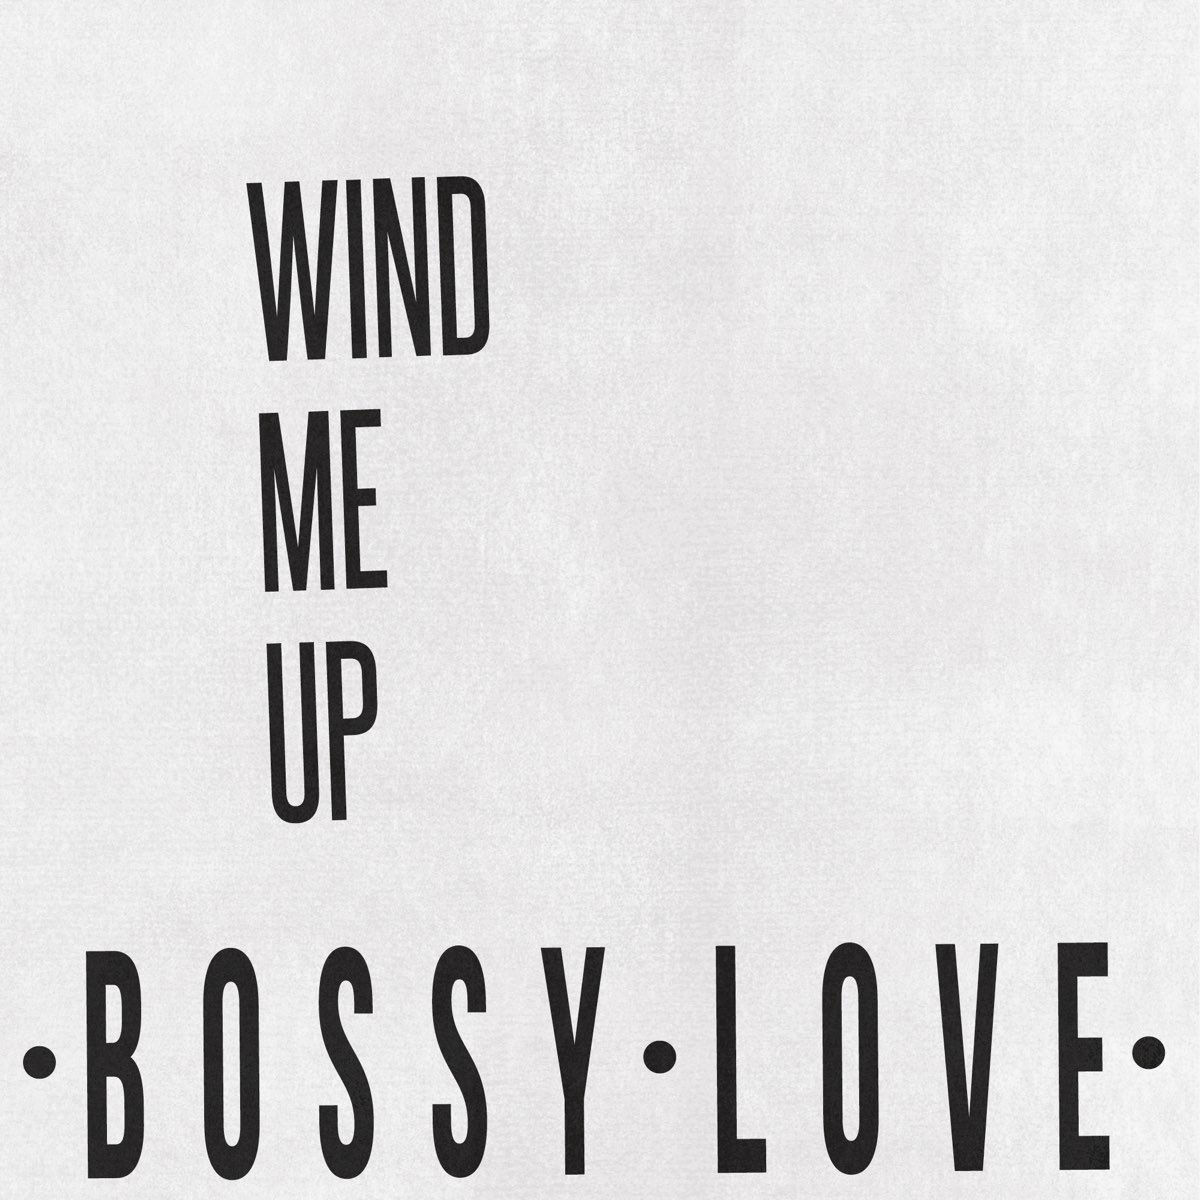 Winds me up. You Wind me up. Windy one Love. I’M not the Final Boss’ lover. I love boss